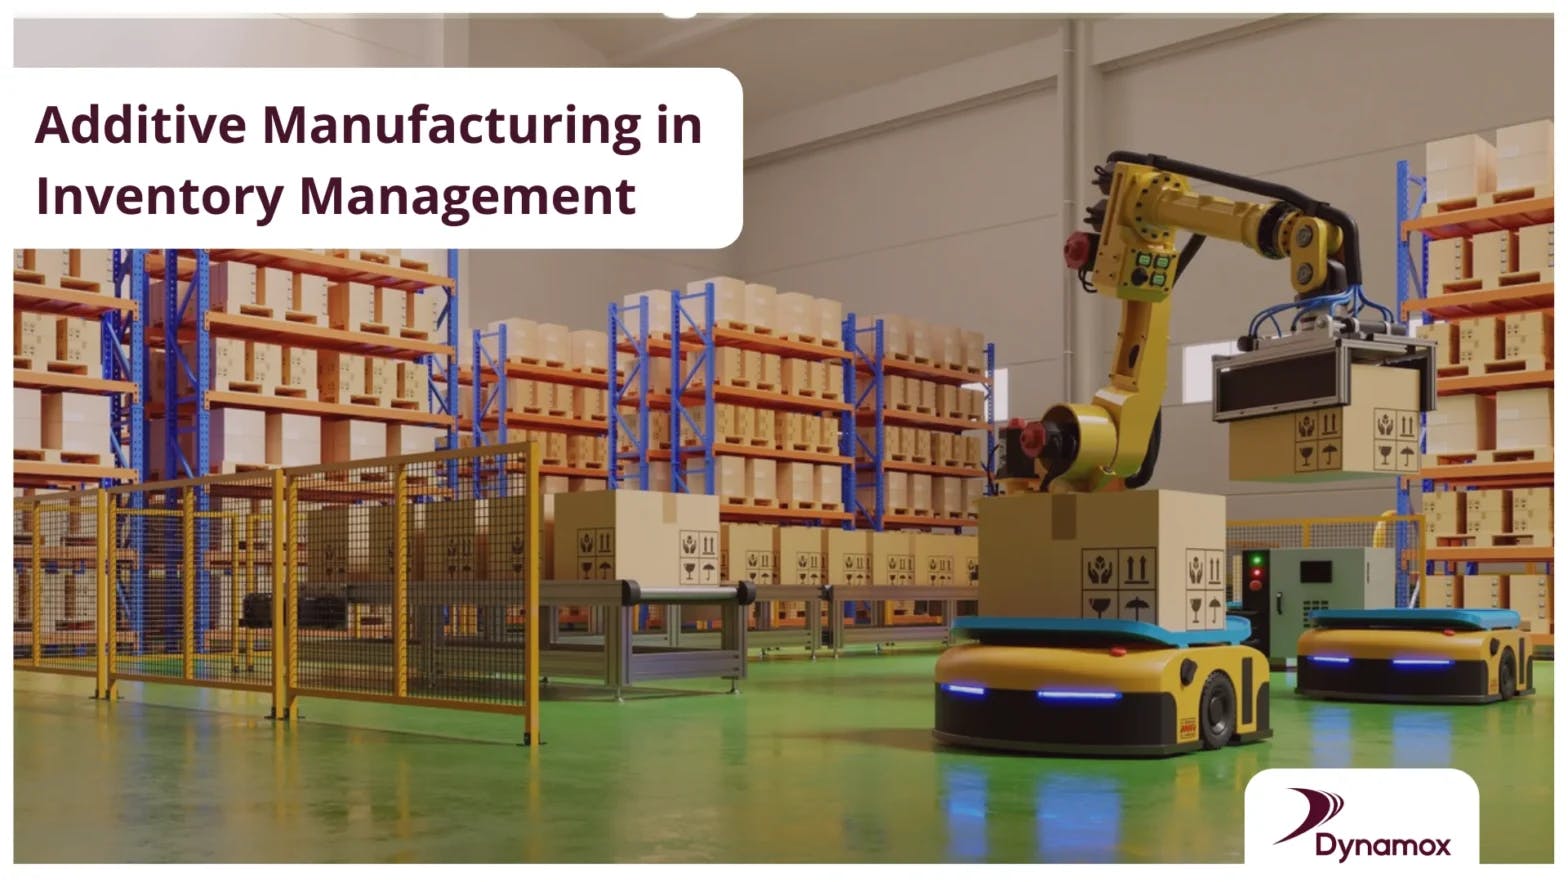 Additive Manufacturing in Inventory Management